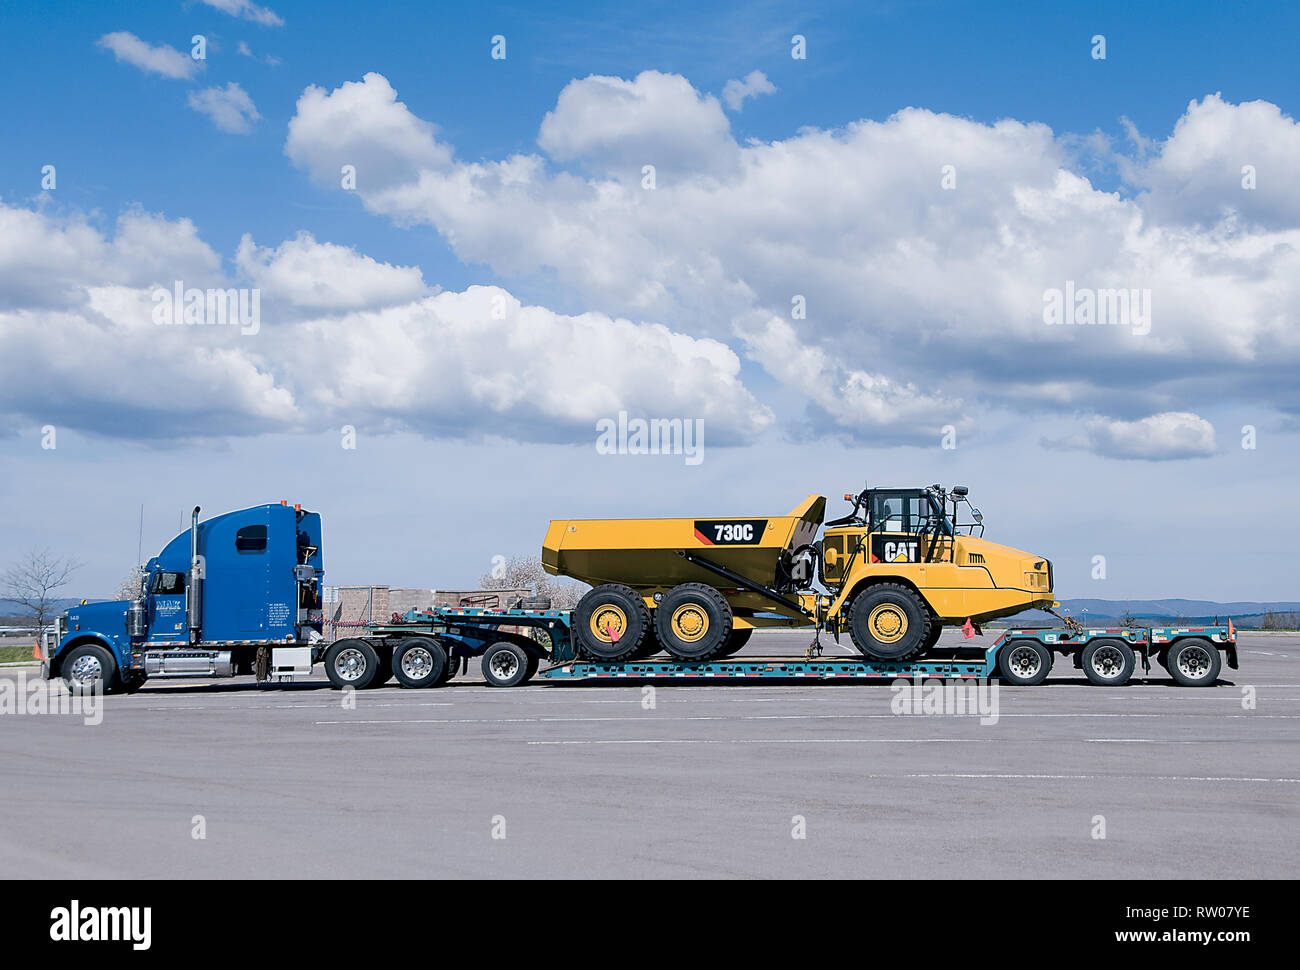 Caterpillar 730C Articulated Dump Truck Off-Highway Diesel on Flatbed Stock Photo